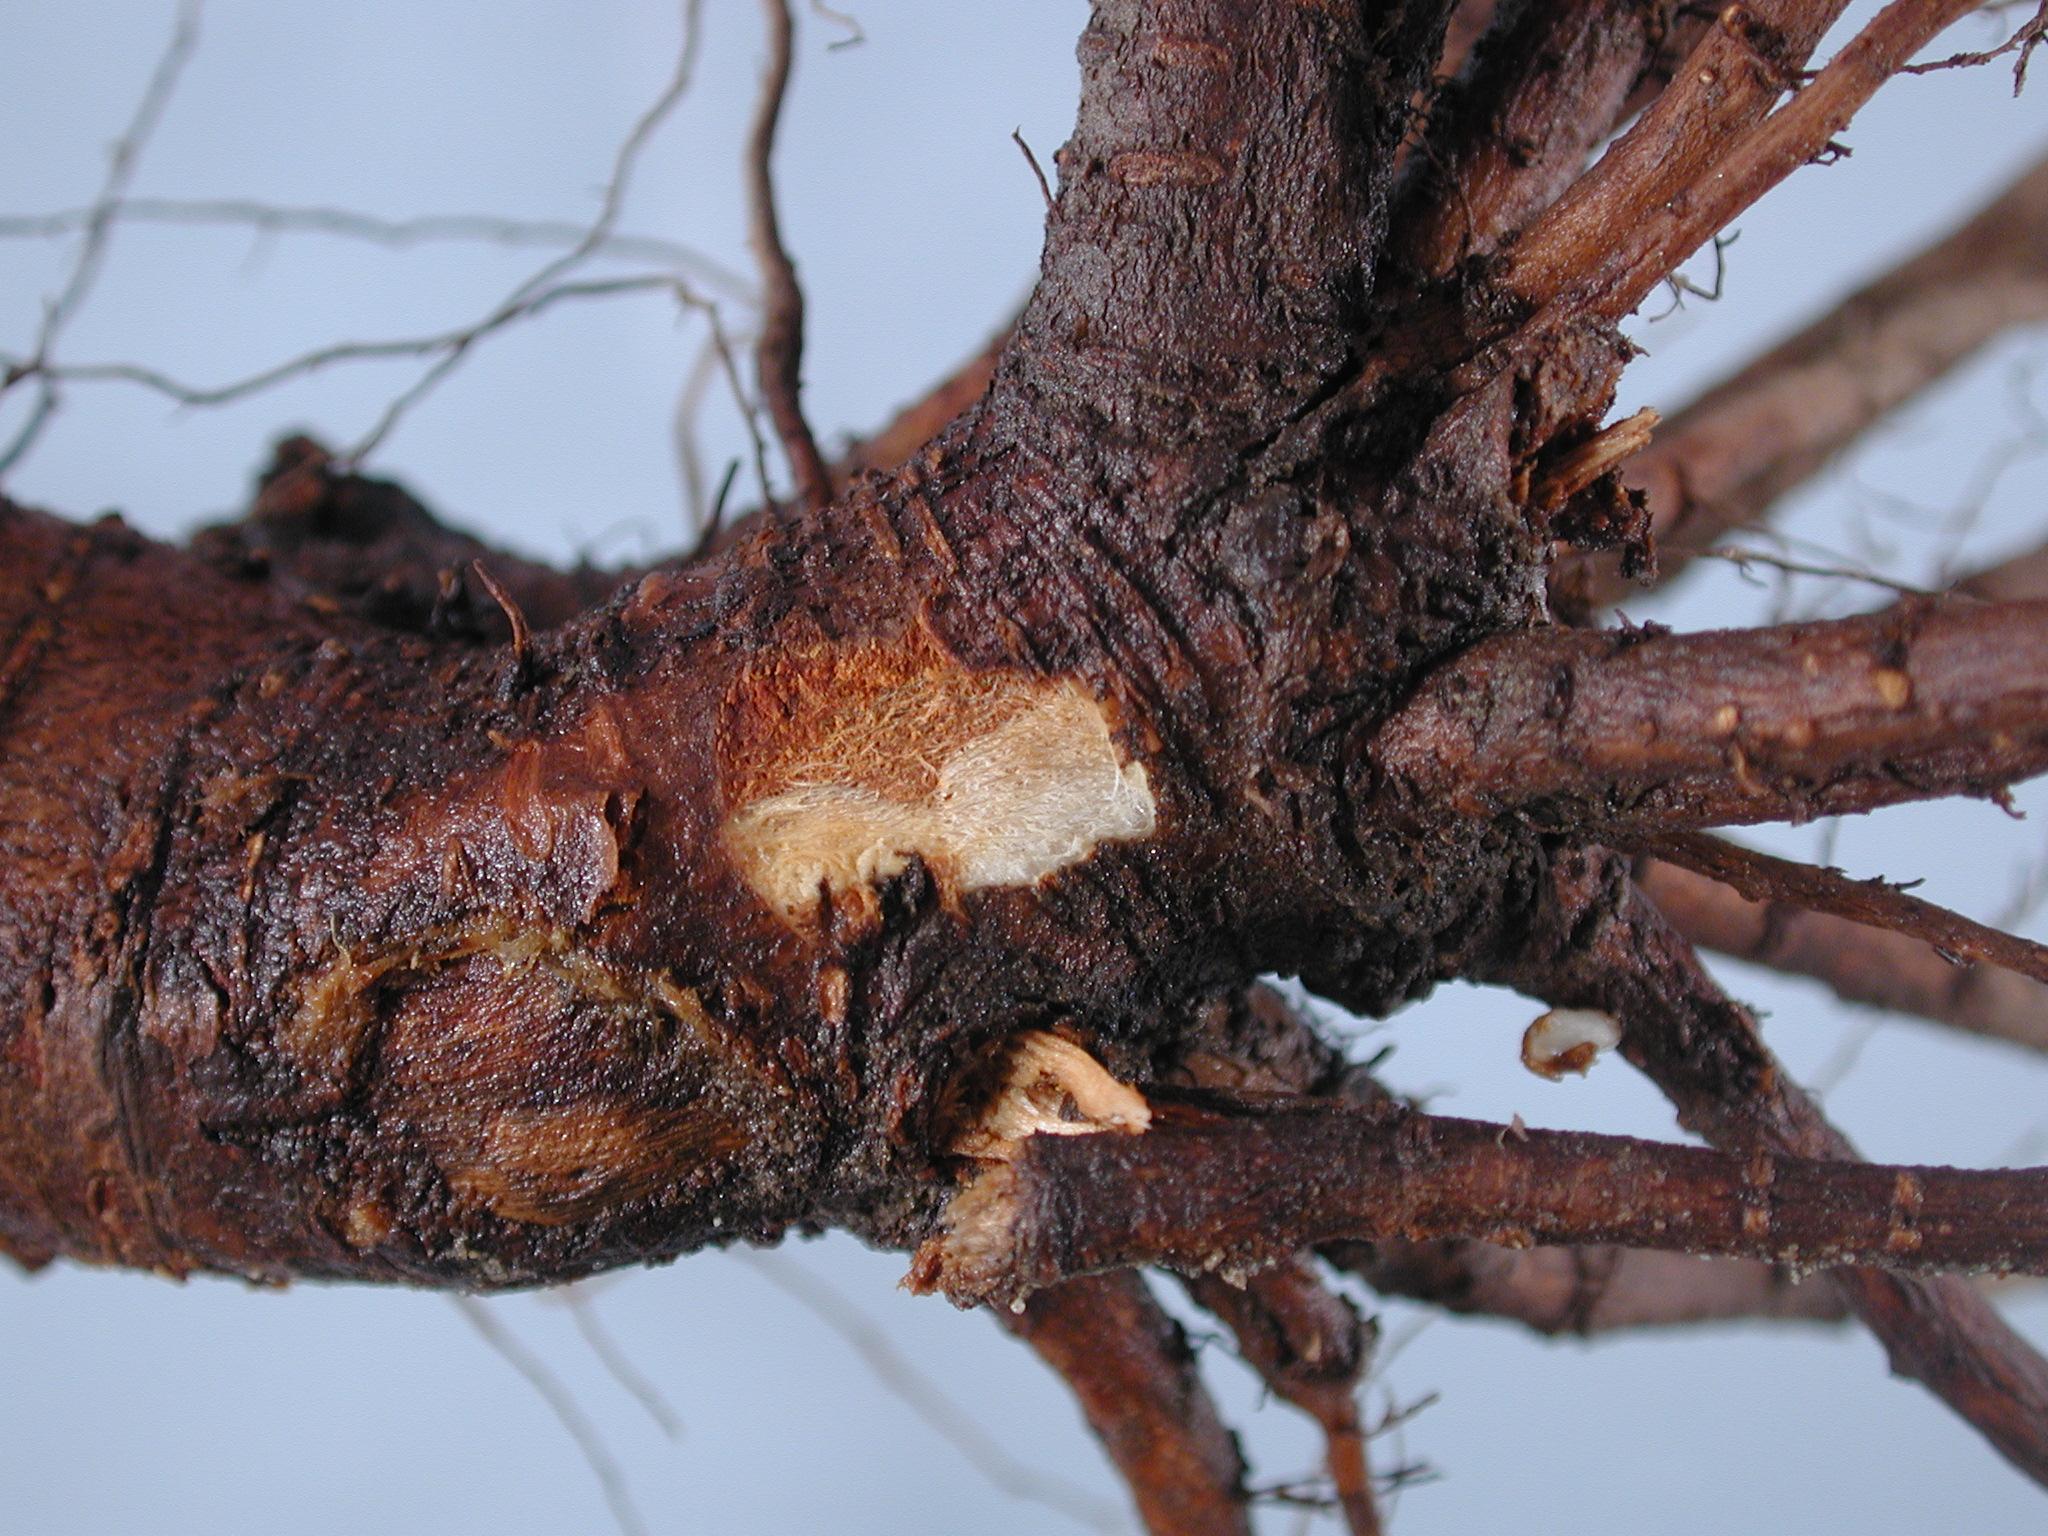 Typical discoloration of root tissues infected with Phytophthora root and crown rot. 